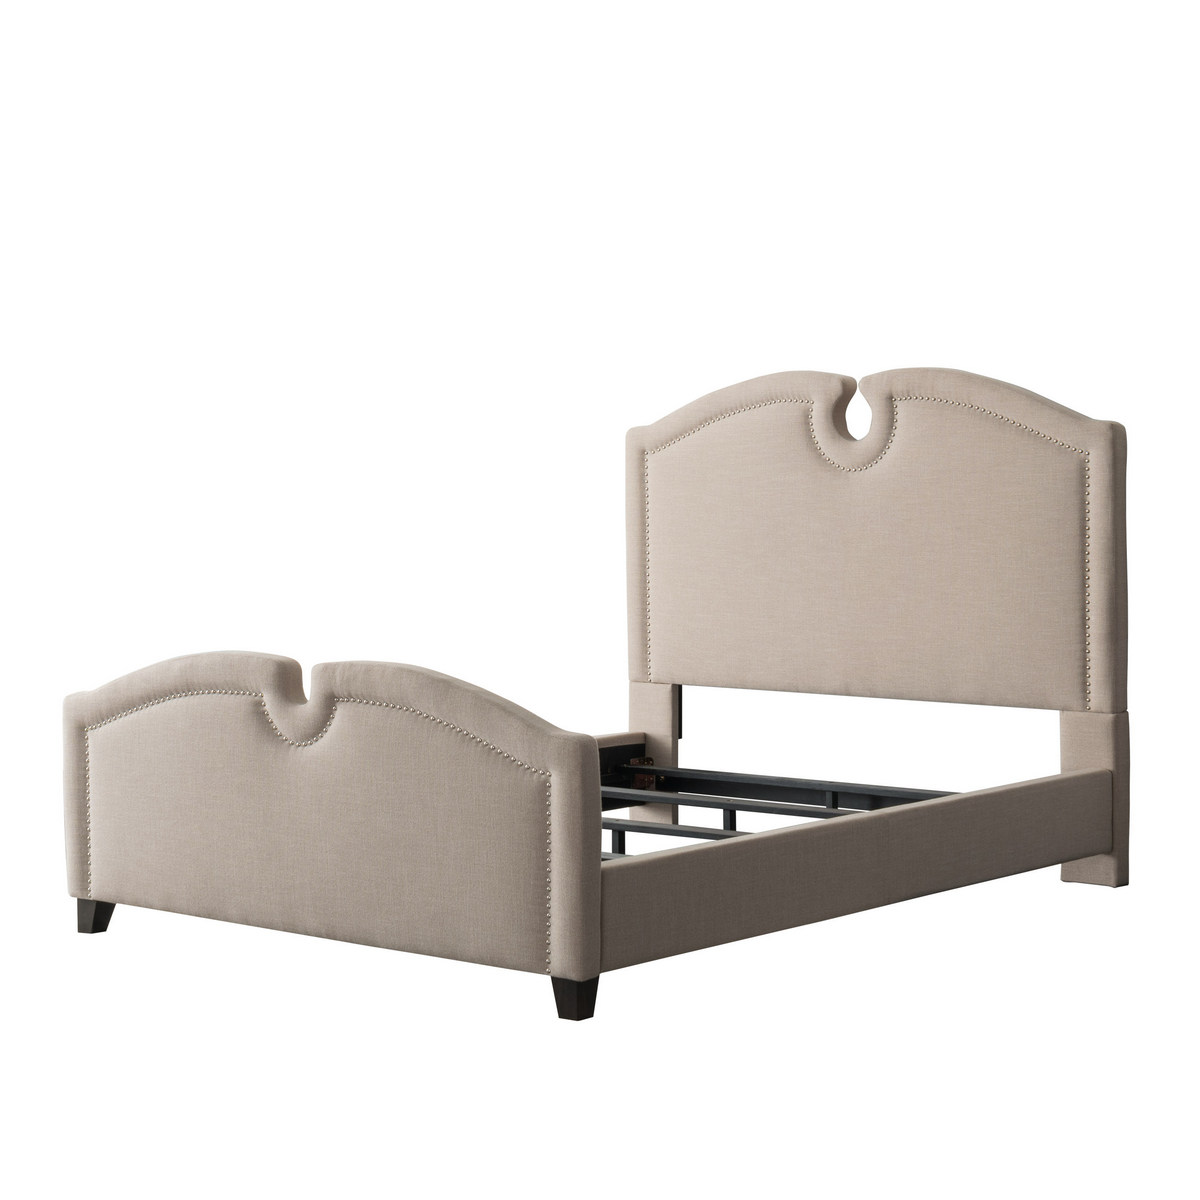 Beige Fabric Curved Top Bed King